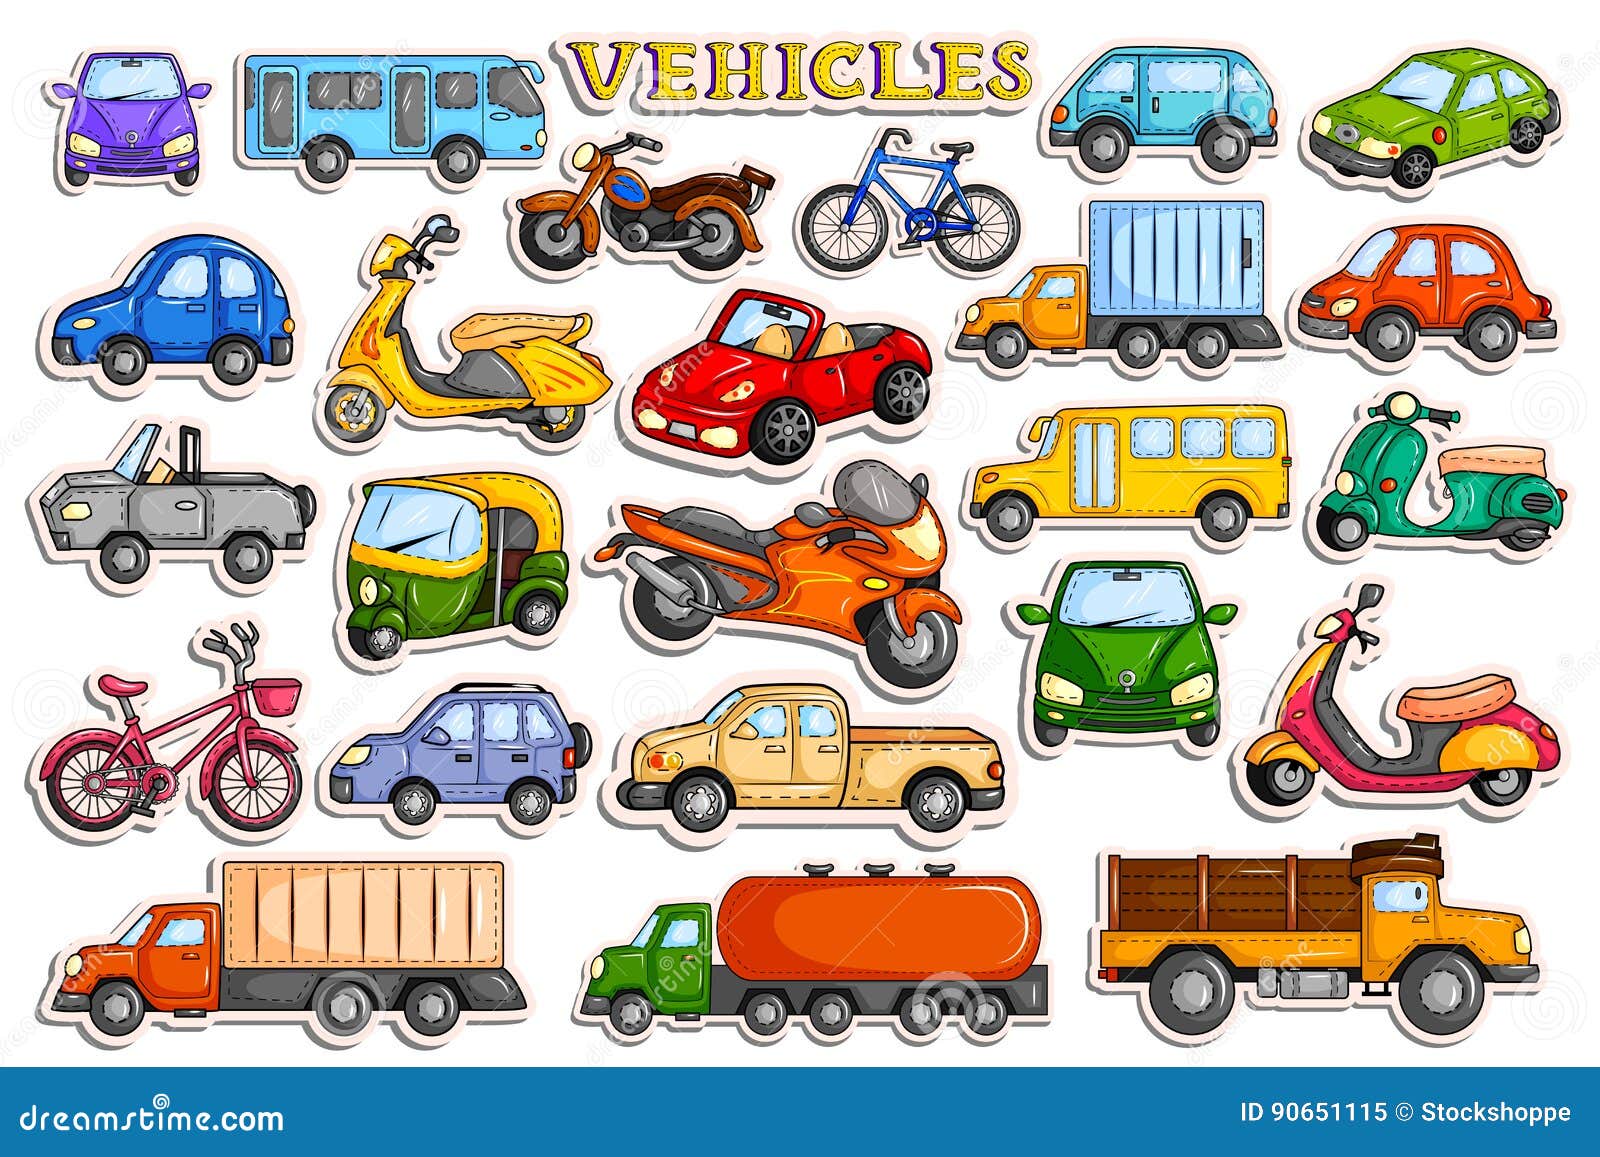 different means of transportation vehicle in sticker style